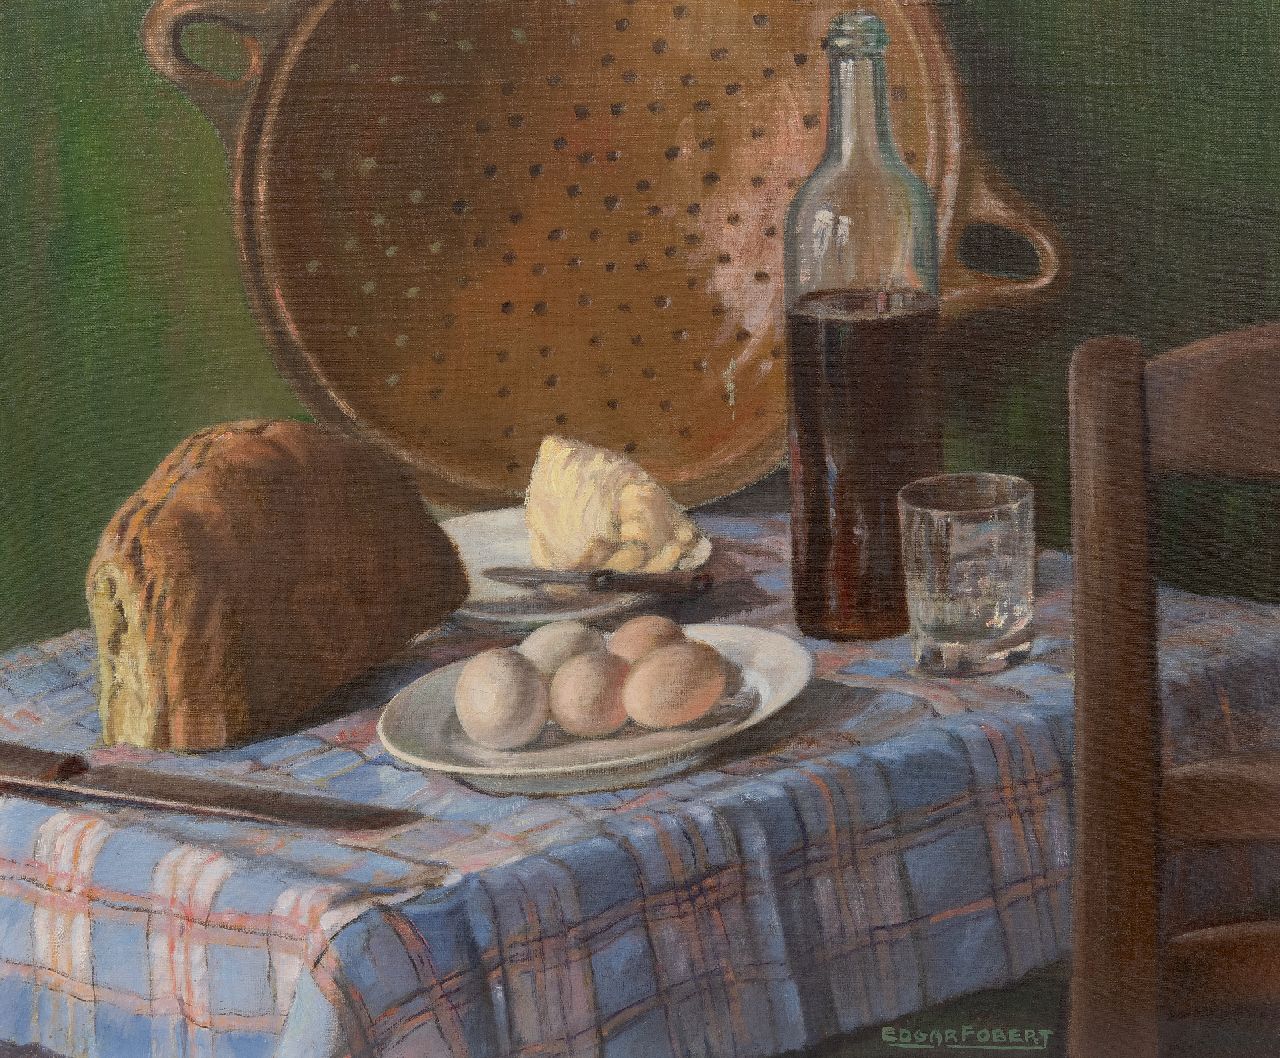 Fobert E.  | Edgar Fobert | Paintings offered for sale | Still life with bread, butter and eggs, oil on canvas 50.2 x 60.5 cm, signed l.r.